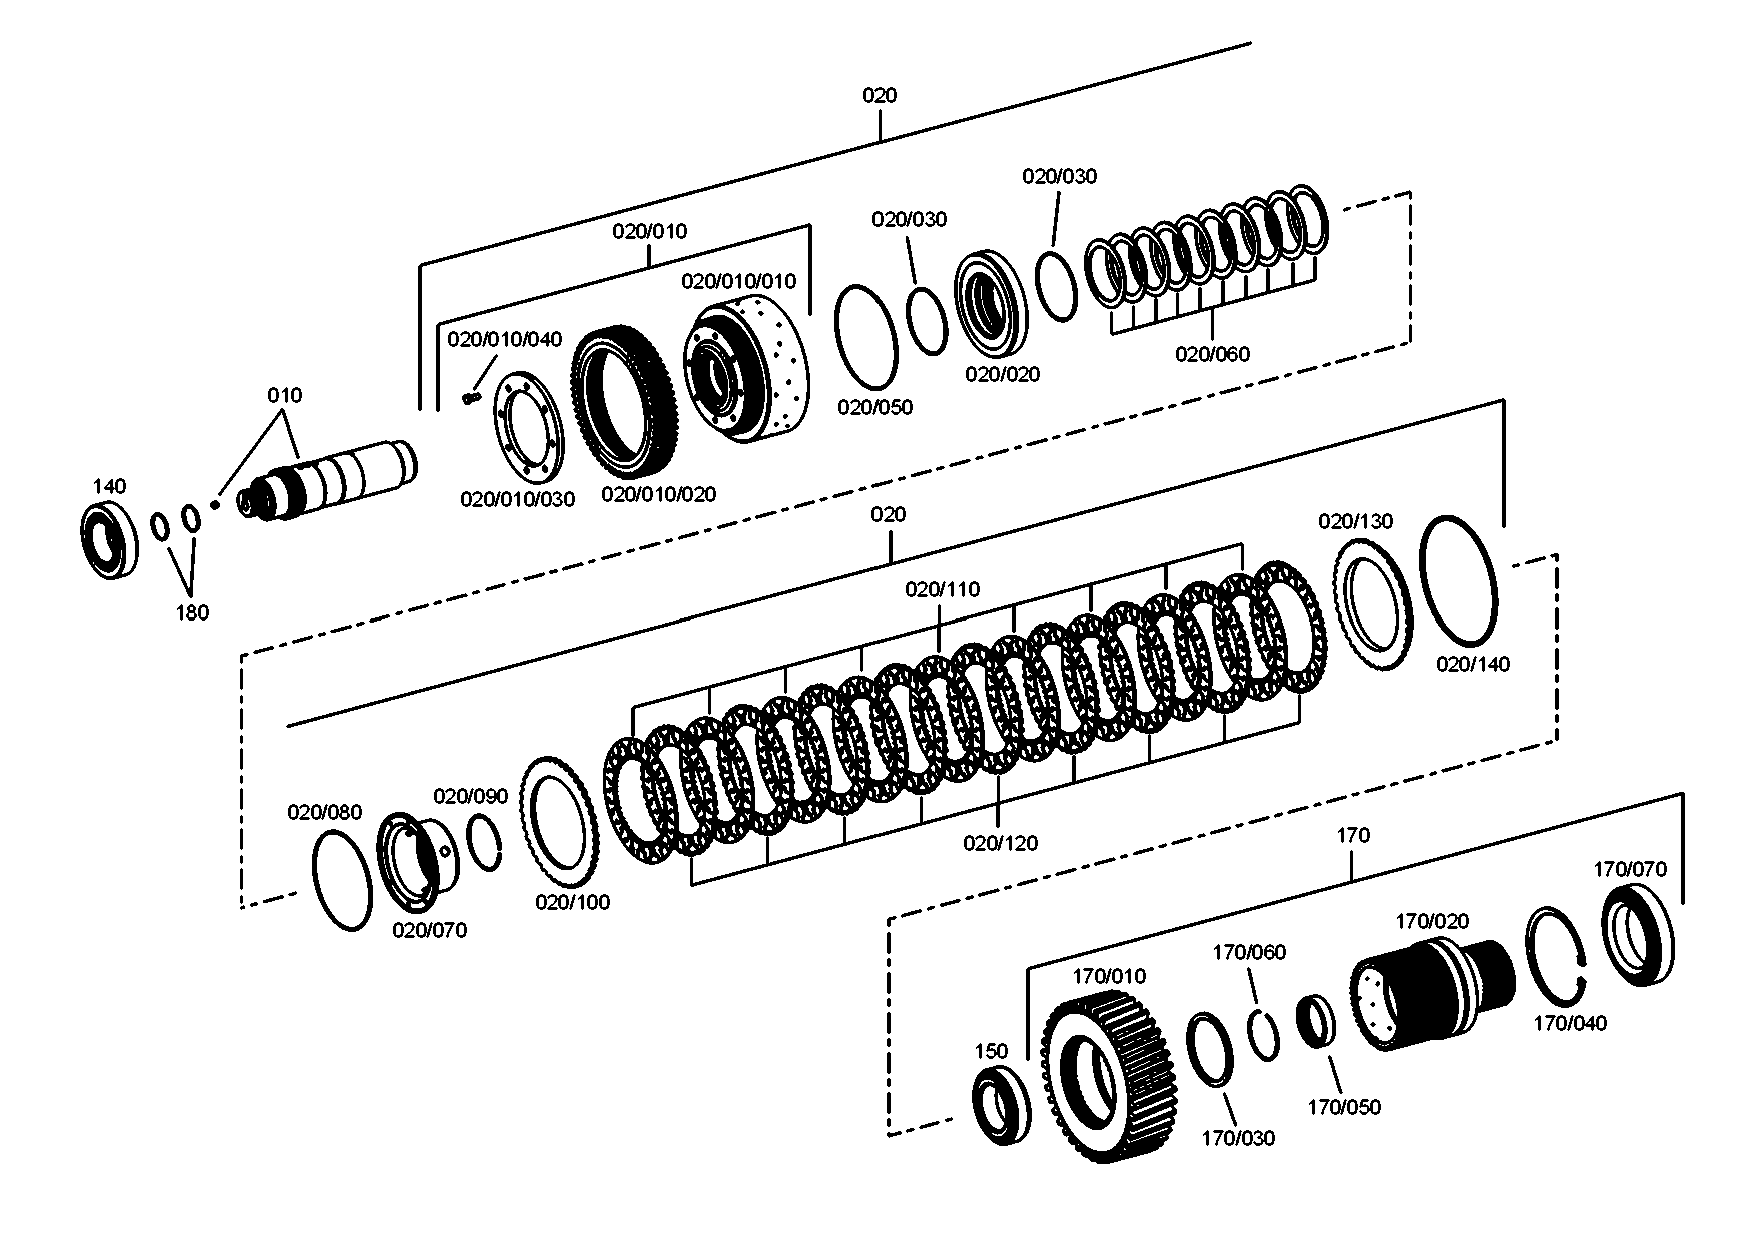 drawing for ASIA MOTORS CO. INC. 409-01-0130 - SNAP RING (figure 1)